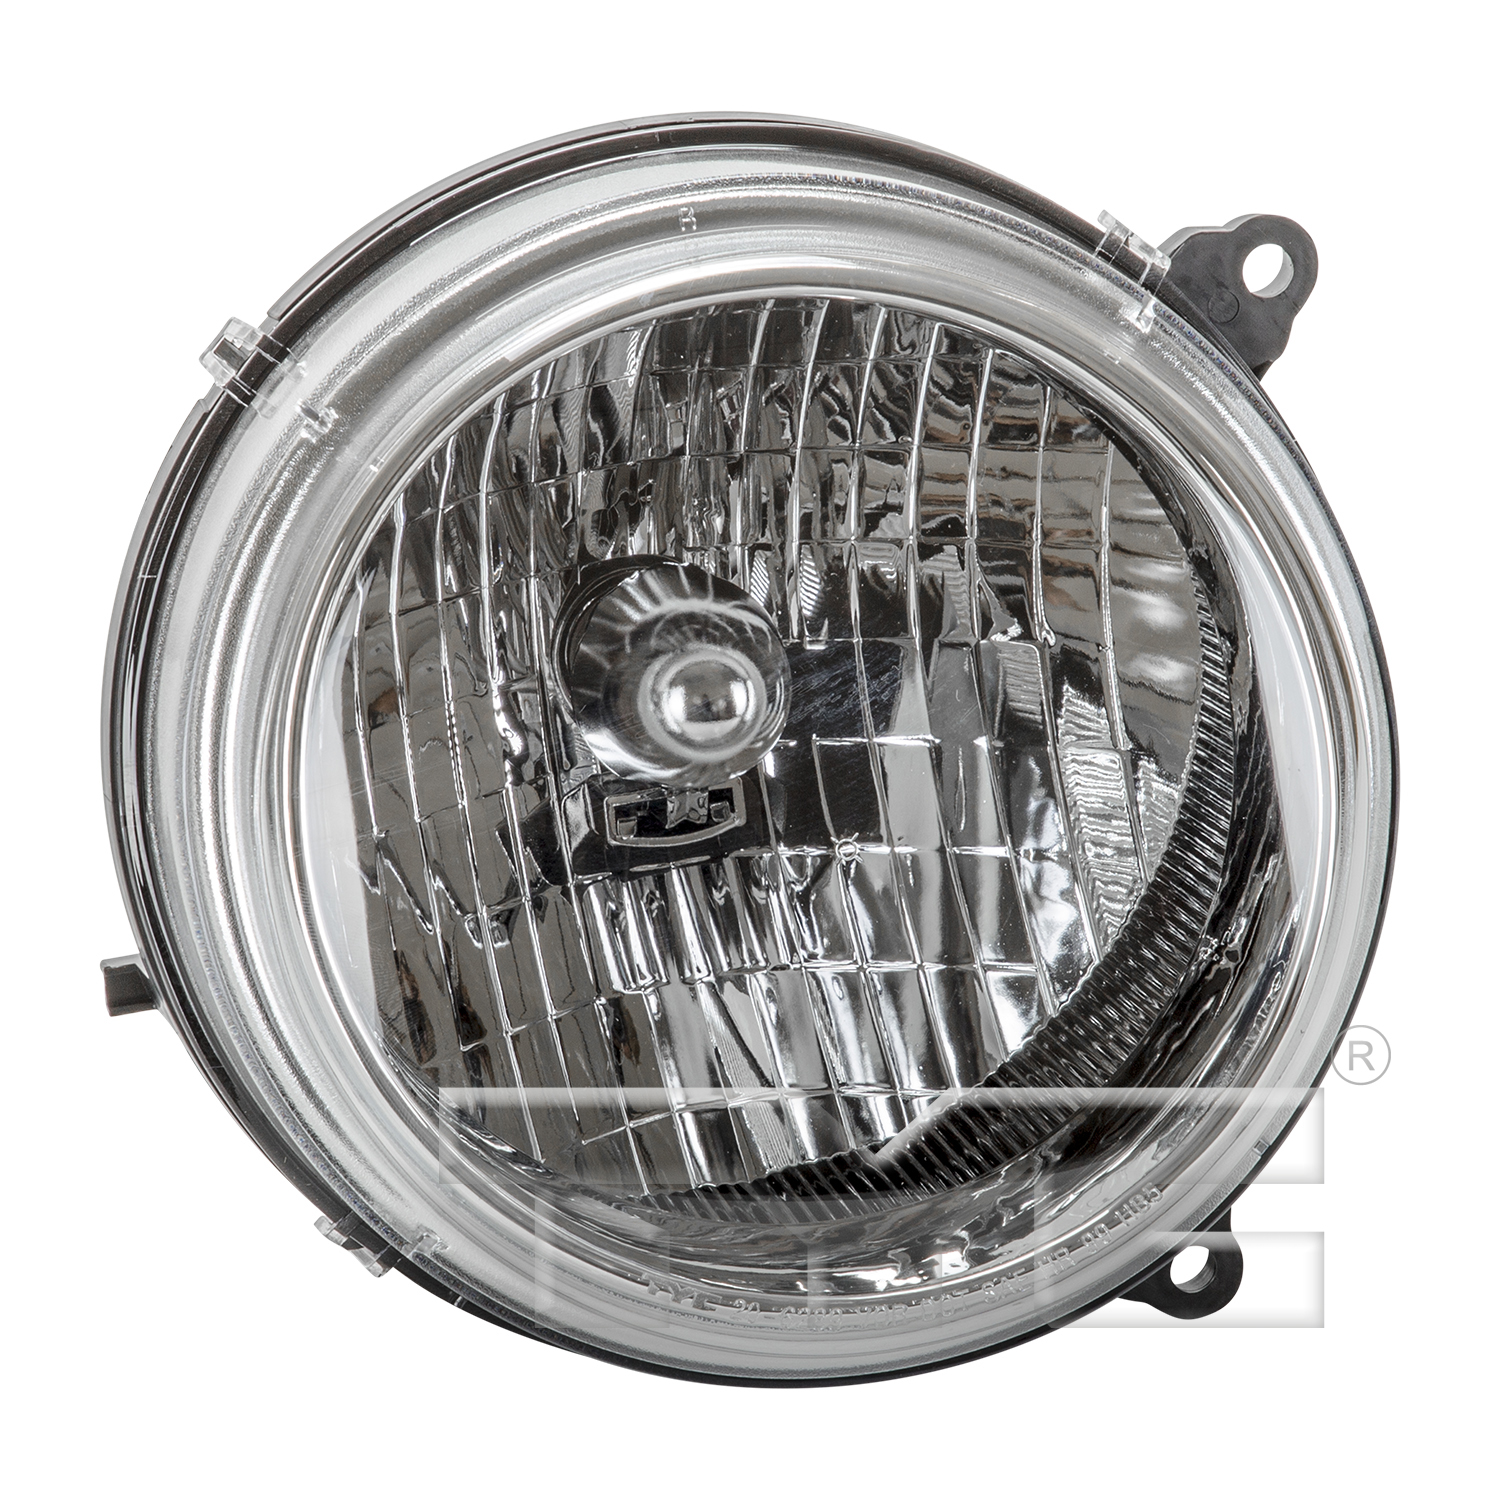 Aftermarket HEADLIGHTS for JEEP - LIBERTY, LIBERTY,02-03,RT Headlamp assy composite